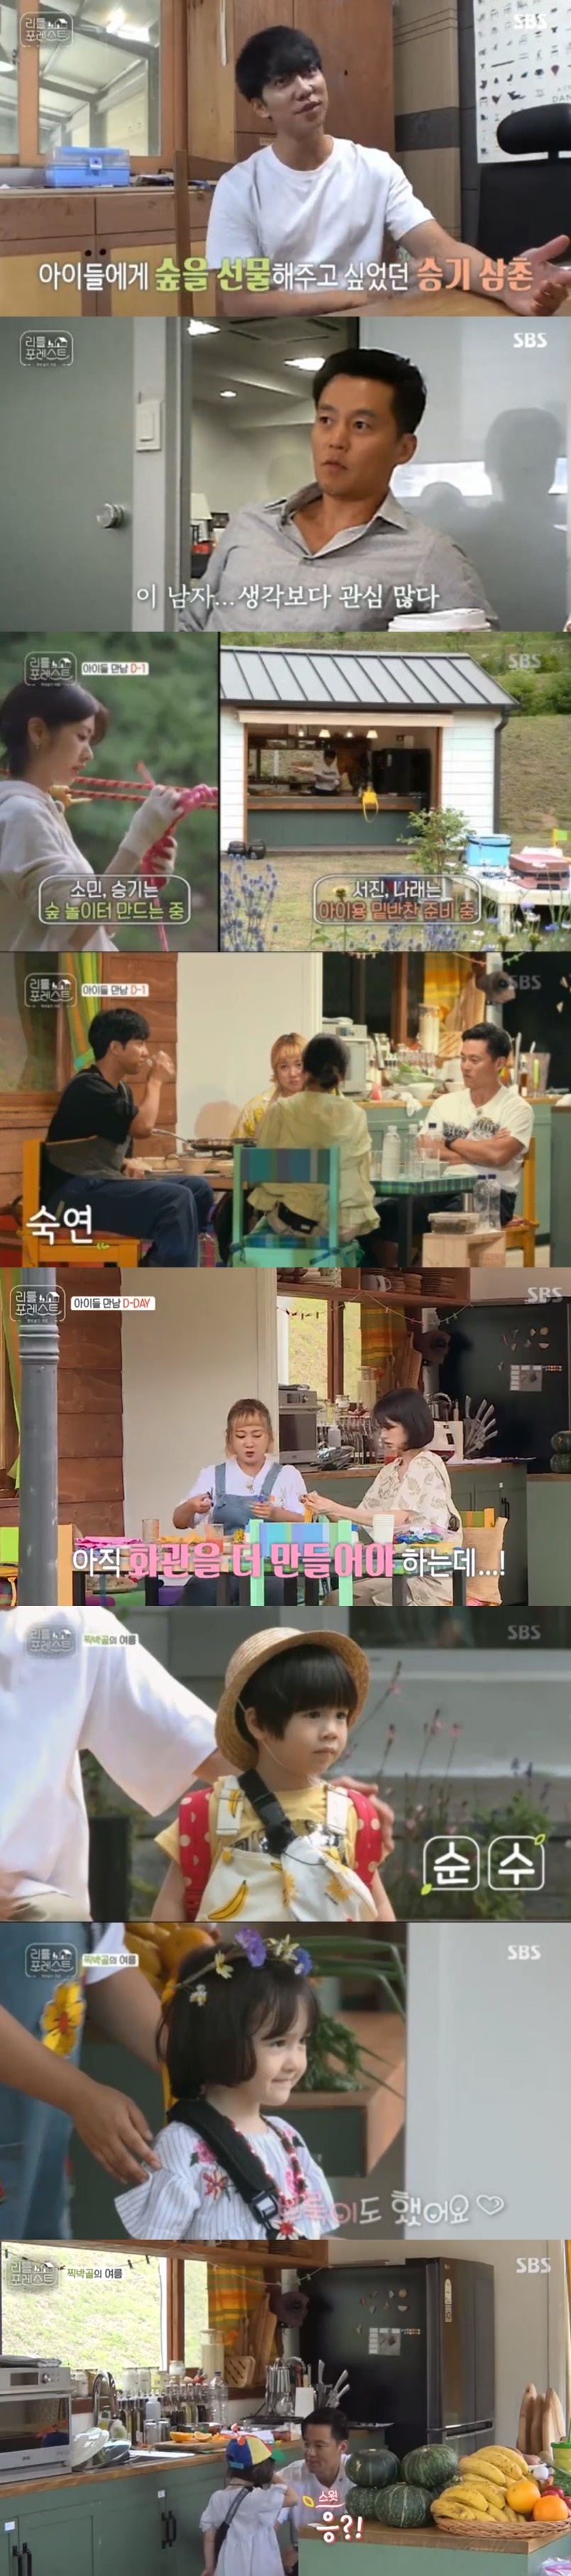 SBSs first monthly entertainment show Little Forest has caught both ratings and topicality since its first broadcast.Little Forest, which was first broadcast on the 12th, recorded a target audience rating of 3.5 percent (hereinafter based on Nielsen Korea metropolitan area furniture, part 2), ranking first in the same time zone, as well as the overall number one in the drama and entertainment programs broadcast on the same day.The average audience rating was 5.3% for the first part and 7.5% for the second part, surpassing all the dramas broadcast on the same time zone, and the highest audience rating per minute jumped to 9.9%.In addition, the names of major cast members such as Little Forest, Lee Seo-jin, Lee Seung-gi-gi-gi, and Jung So-min have risen and fell on the main portal search terms since the start of the broadcast, attracting the attention of viewers.Little Forest is a pollution-free clean entertainment that provides care services in the blue nature to children who have no place to play with the Caring House project in the forest for children by children and children.On this day, four members who were full of presence met for the first time at Jung So-mins House.The members were awkward and thrilled, and Lee Seo-jin and Park Na-rae, who knew each other, were constantly attracted to the eyes.They went into the meeting immediately because it was less than a month before the caring House opened.Lee Seung-gi-gi Gi and Jung So Min showed a passion and enthusiasm for their desire to acquire a child psychological counselor certificate to understand the psychology of the child.Lee Seo-jin also grumbled, but showed a careful view that children should care more about their liver so that they do not get salty. On the other hand, Park Na-rae was worried about the first child care.Finally, the members who arrived at Inje Gangbanggol in Gangwon province were impressed by the refreshing and wonderful scenery.However, I was surprised by the beautiful scenery, and I started to prepare for the children who came to tomorrow immediately, and Lee Seung-gi-gi Gi made a Forest for the children himself.The members were worried about the rules of life with Little (children) while eating dinner, and Lee Seung-gi-gi-gi set the rule that Lets write honorific words when adults are together and not say bad words.The breathing of Mista Lee Lee Seo-jin and Park Na-rae was the point of the broadcast on the day, and the two showed a tit-for-tat while making a side dish for the children.I will make childrens dishes for the first time, Park Na-rae, Main chef Lee Seo-jin said, Its salty, and she was so excited that she was not sweet, and she soon laughed and laughed and made her expect Kimi.In addition, Lee Seo-jin showed the aspect of Sweet Nam.Even though I showed my unique charm as if I was indifferent until I was with the members, I surprised everyone by showing a friendly expression and voice that I could not meet before when I met the children.In particular, when Brooke approached Lee Seo-jin saying, I want to eat tangerines, Lee Seo-jin cut the tangerine immediately and could not see Brooke with his friendly eyes, and this scene won the best one minute with the highest audience rating of 9.9% per minute.Little Forest, which is the first entertainment show to be broadcast for two consecutive days on Monday, captivated viewers with an attempt to differentiate itself from the existing childcare entertainment program called Care Childcare.At the end of the show, the appearance of cute children who entered the film set raised expectations for the second episode. Little Forest will be broadcast every Monday at 10 p.m.=